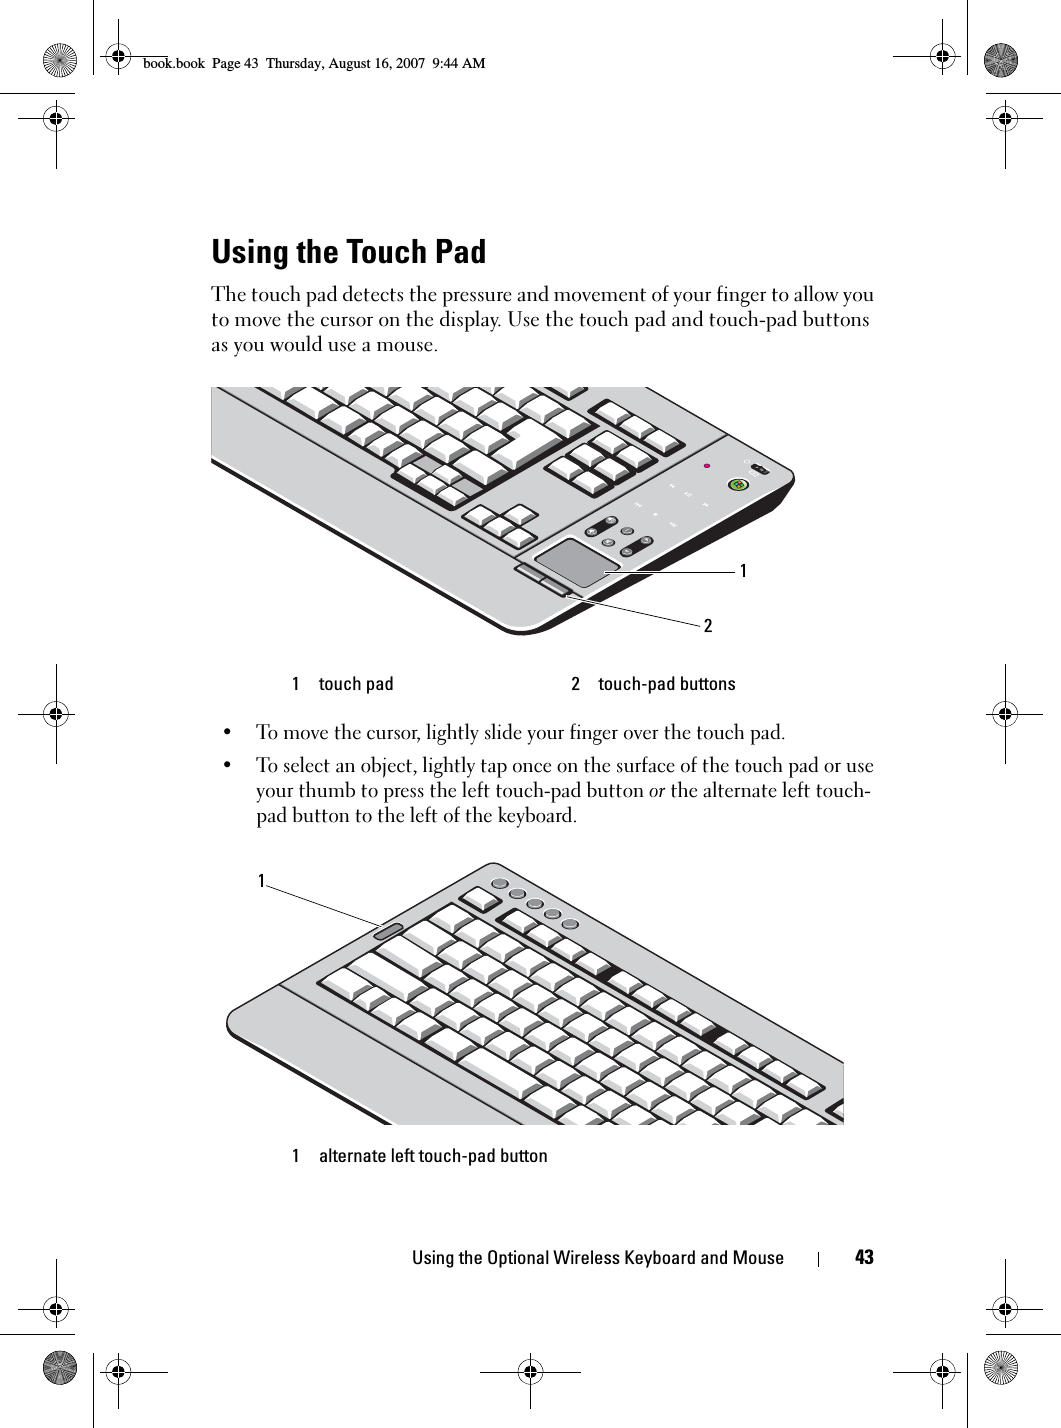 Using the Optional Wireless Keyboard and Mouse 43Using the Touch PadThe touch pad detects the pressure and movement of your finger to allow you to move the cursor on the display. Use the touch pad and touch-pad buttons as you would use a mouse.• To move the cursor, lightly slide your finger over the touch pad.• To select an object, lightly tap once on the surface of the touch pad or use your thumb to press the left touch-pad button or the alternate left touch-pad button to the left of the keyboard.1 touch pad 2 touch-pad buttons1 alternate left touch-pad button211book.book  Page 43  Thursday, August 16, 2007  9:44 AM